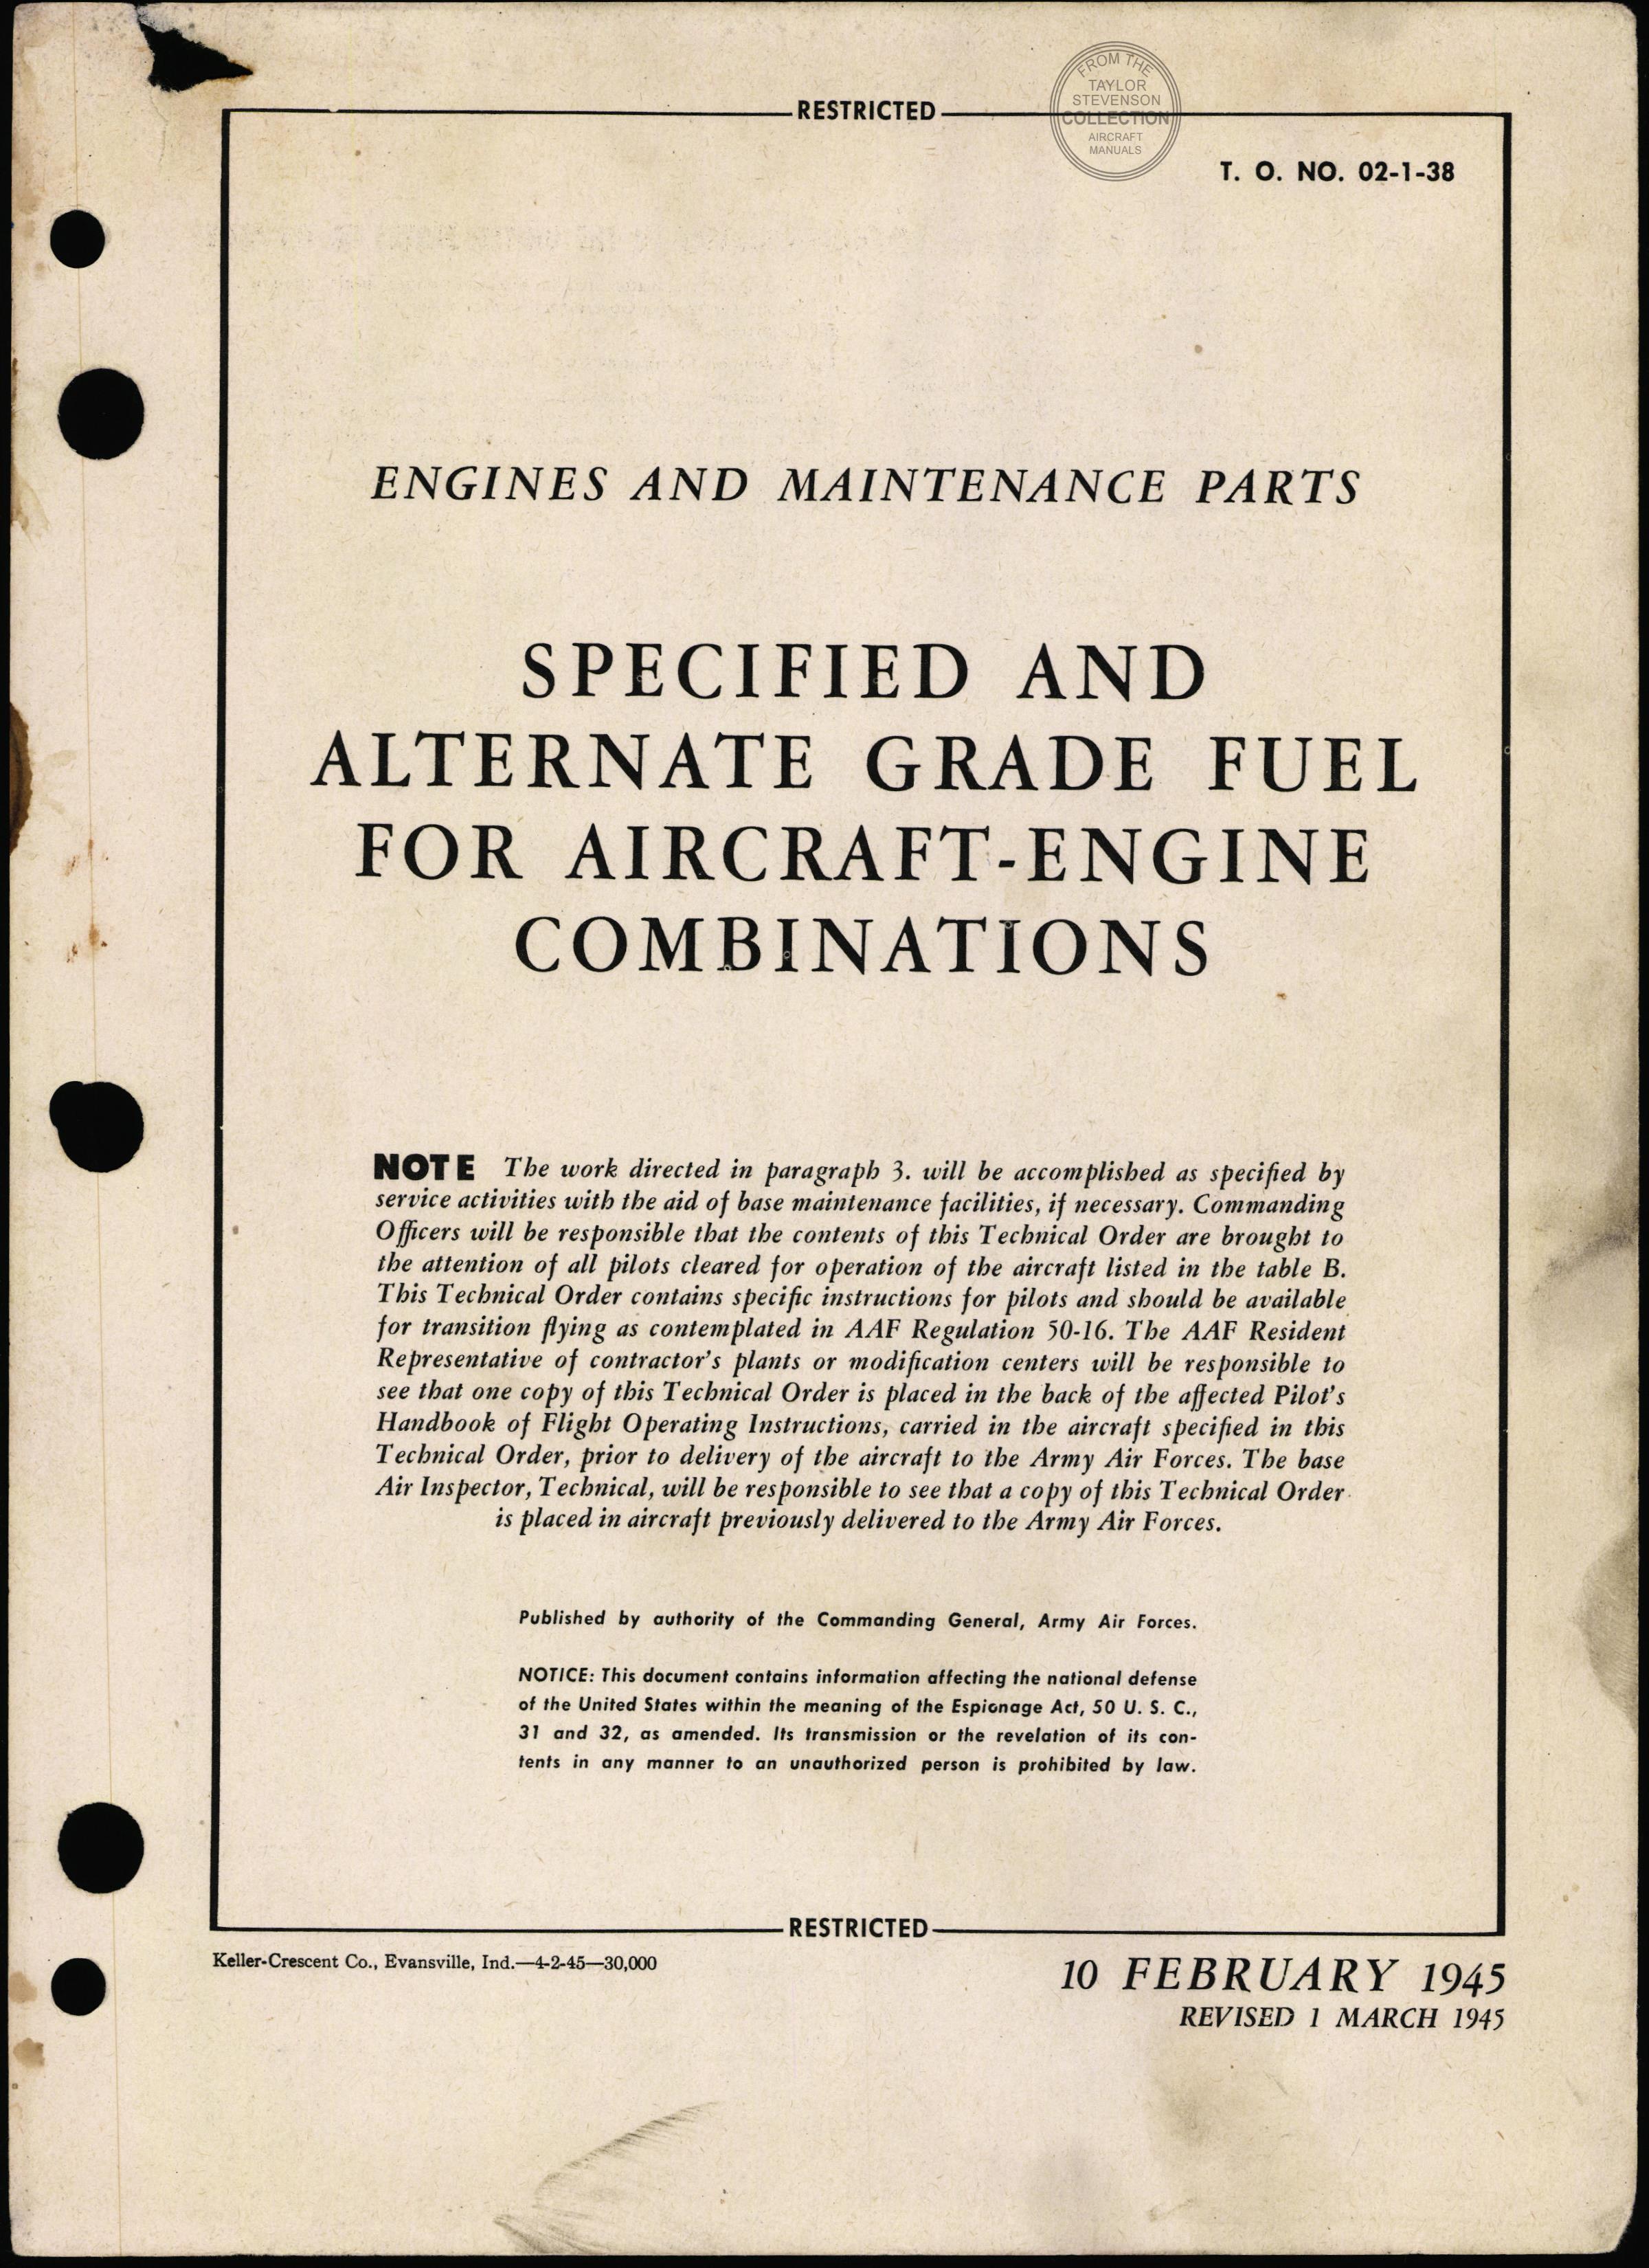 Sample page 1 from AirCorps Library document: Engines and Maintenance Parts - Specified and Alternate Grade Fuel For Aircraft-Engine Combinations